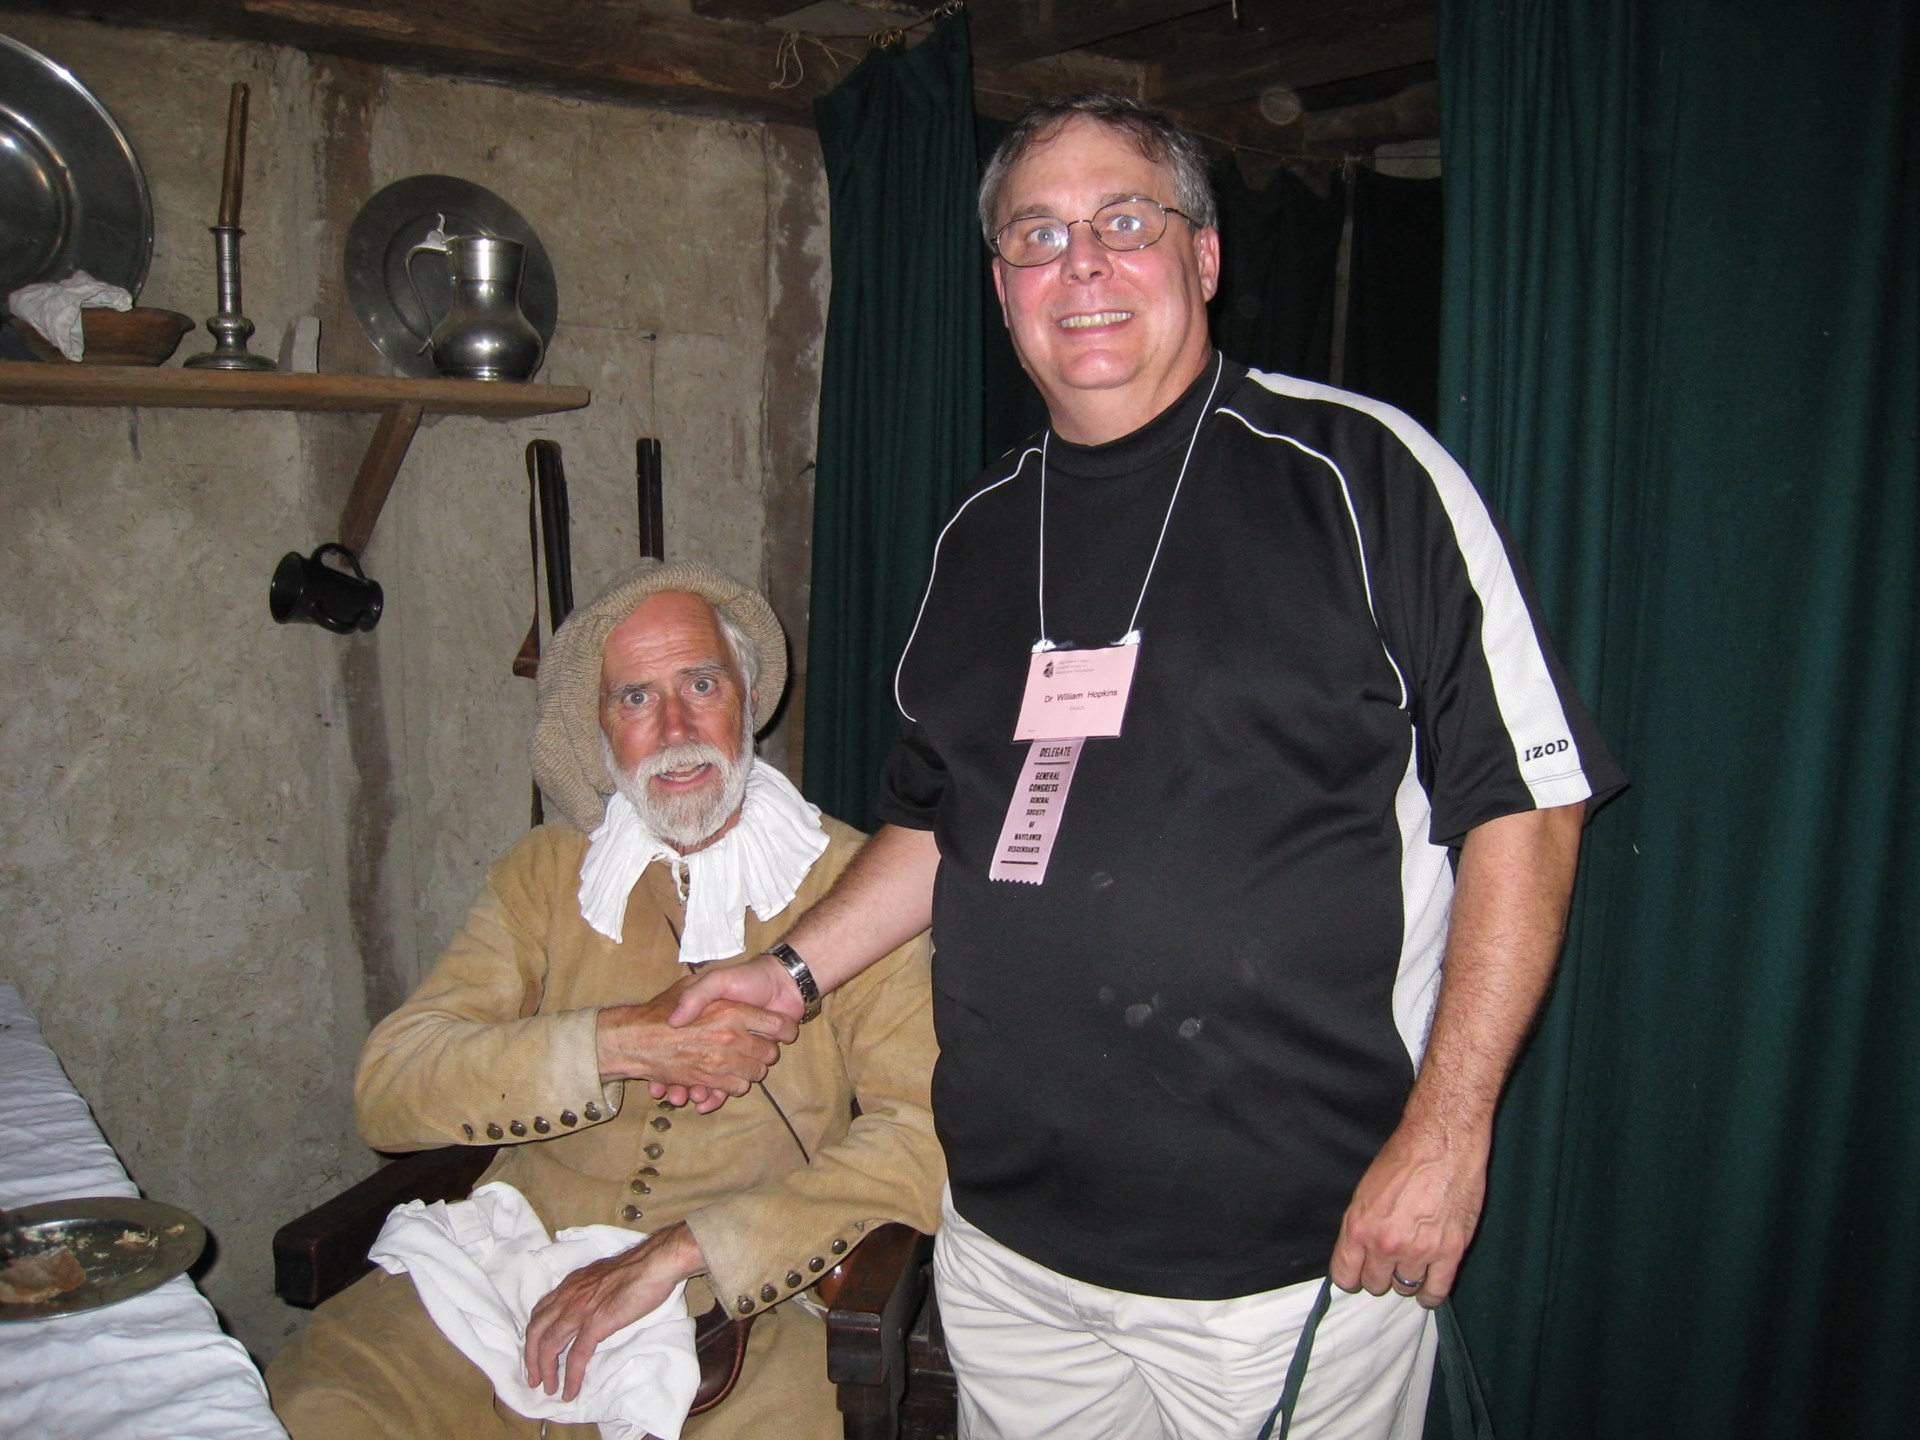 One of the descendants of Stephen Hopkins with an actor in the role of Stephen at the Plymouth Plantation, a re-creation of Plymouth as it would have been in 1627.